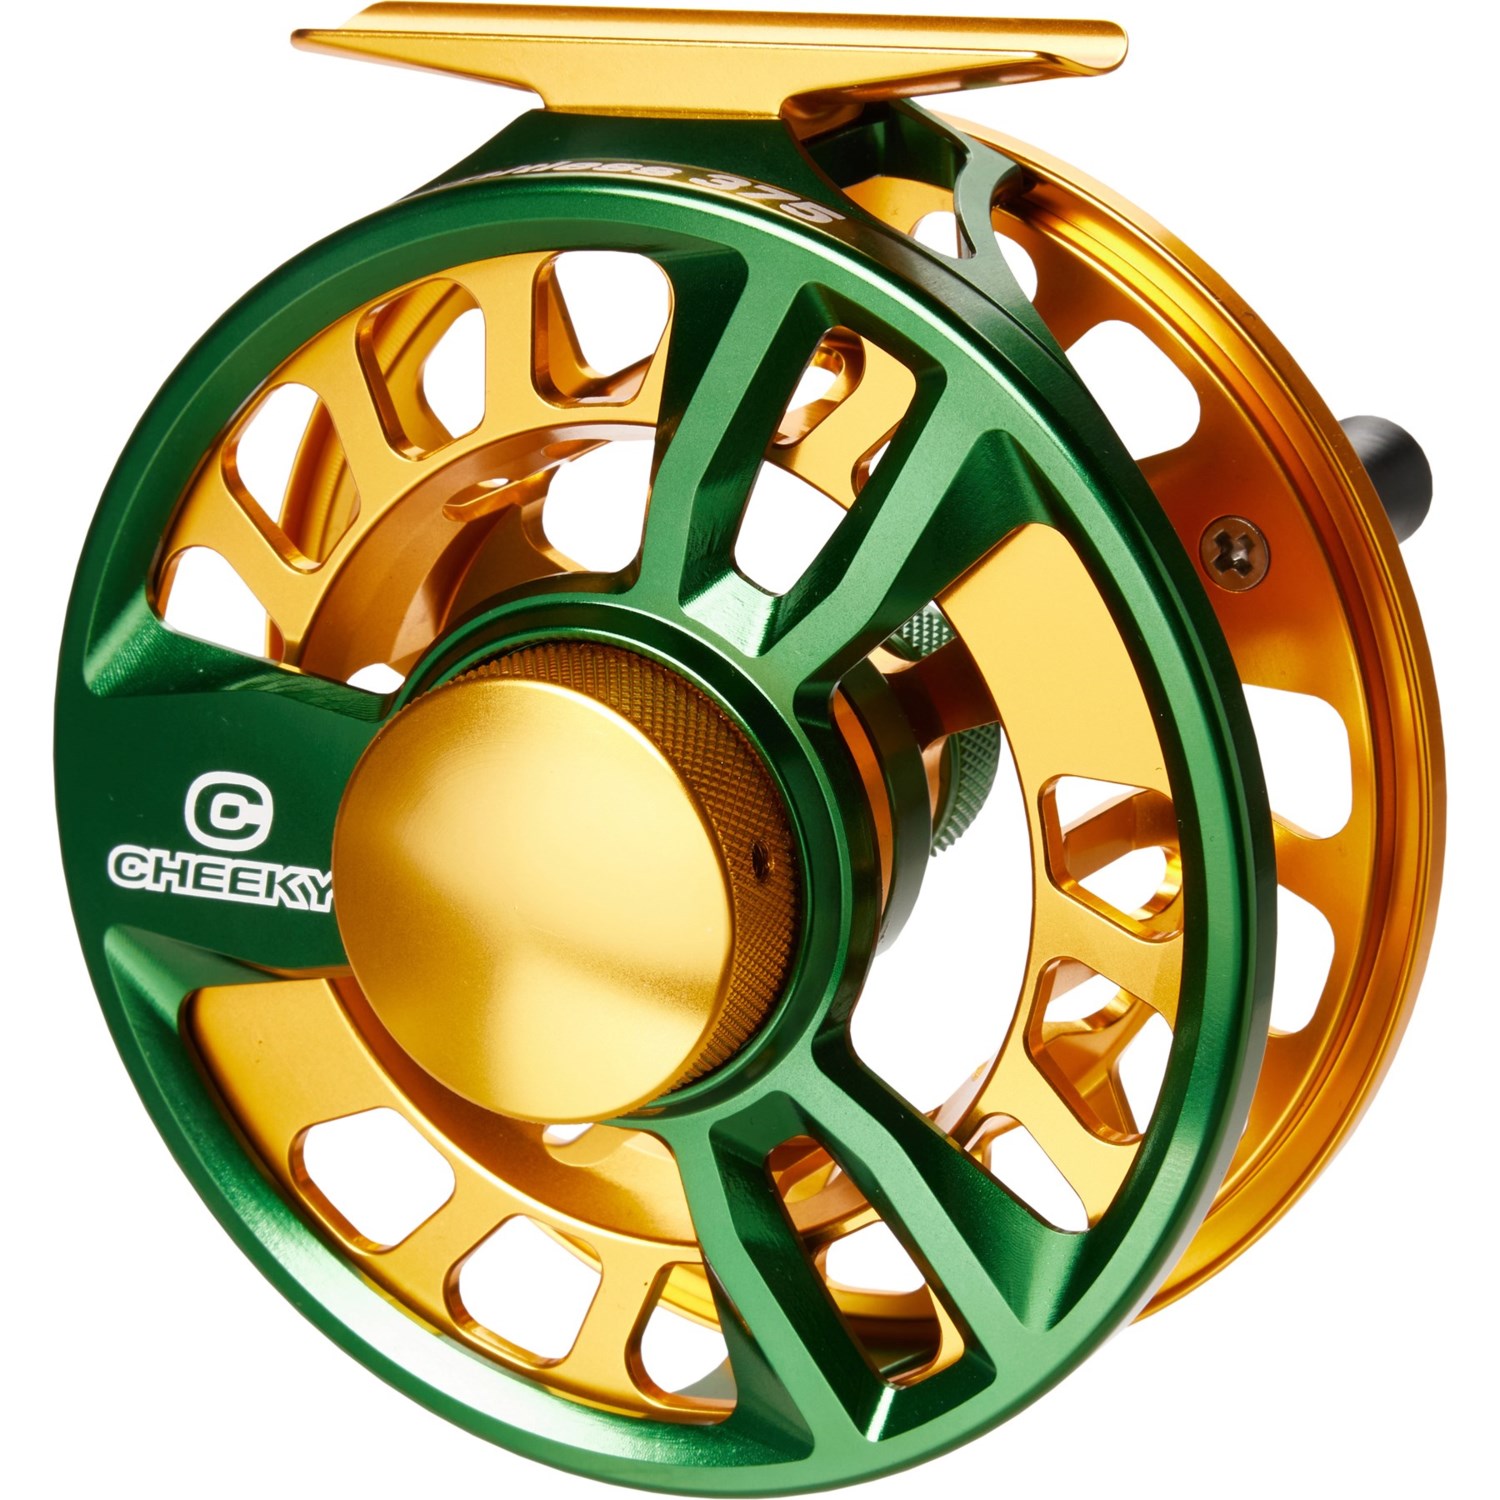  Cheeky Fishing Limitless 325 Fly Reel, Orange/Silver